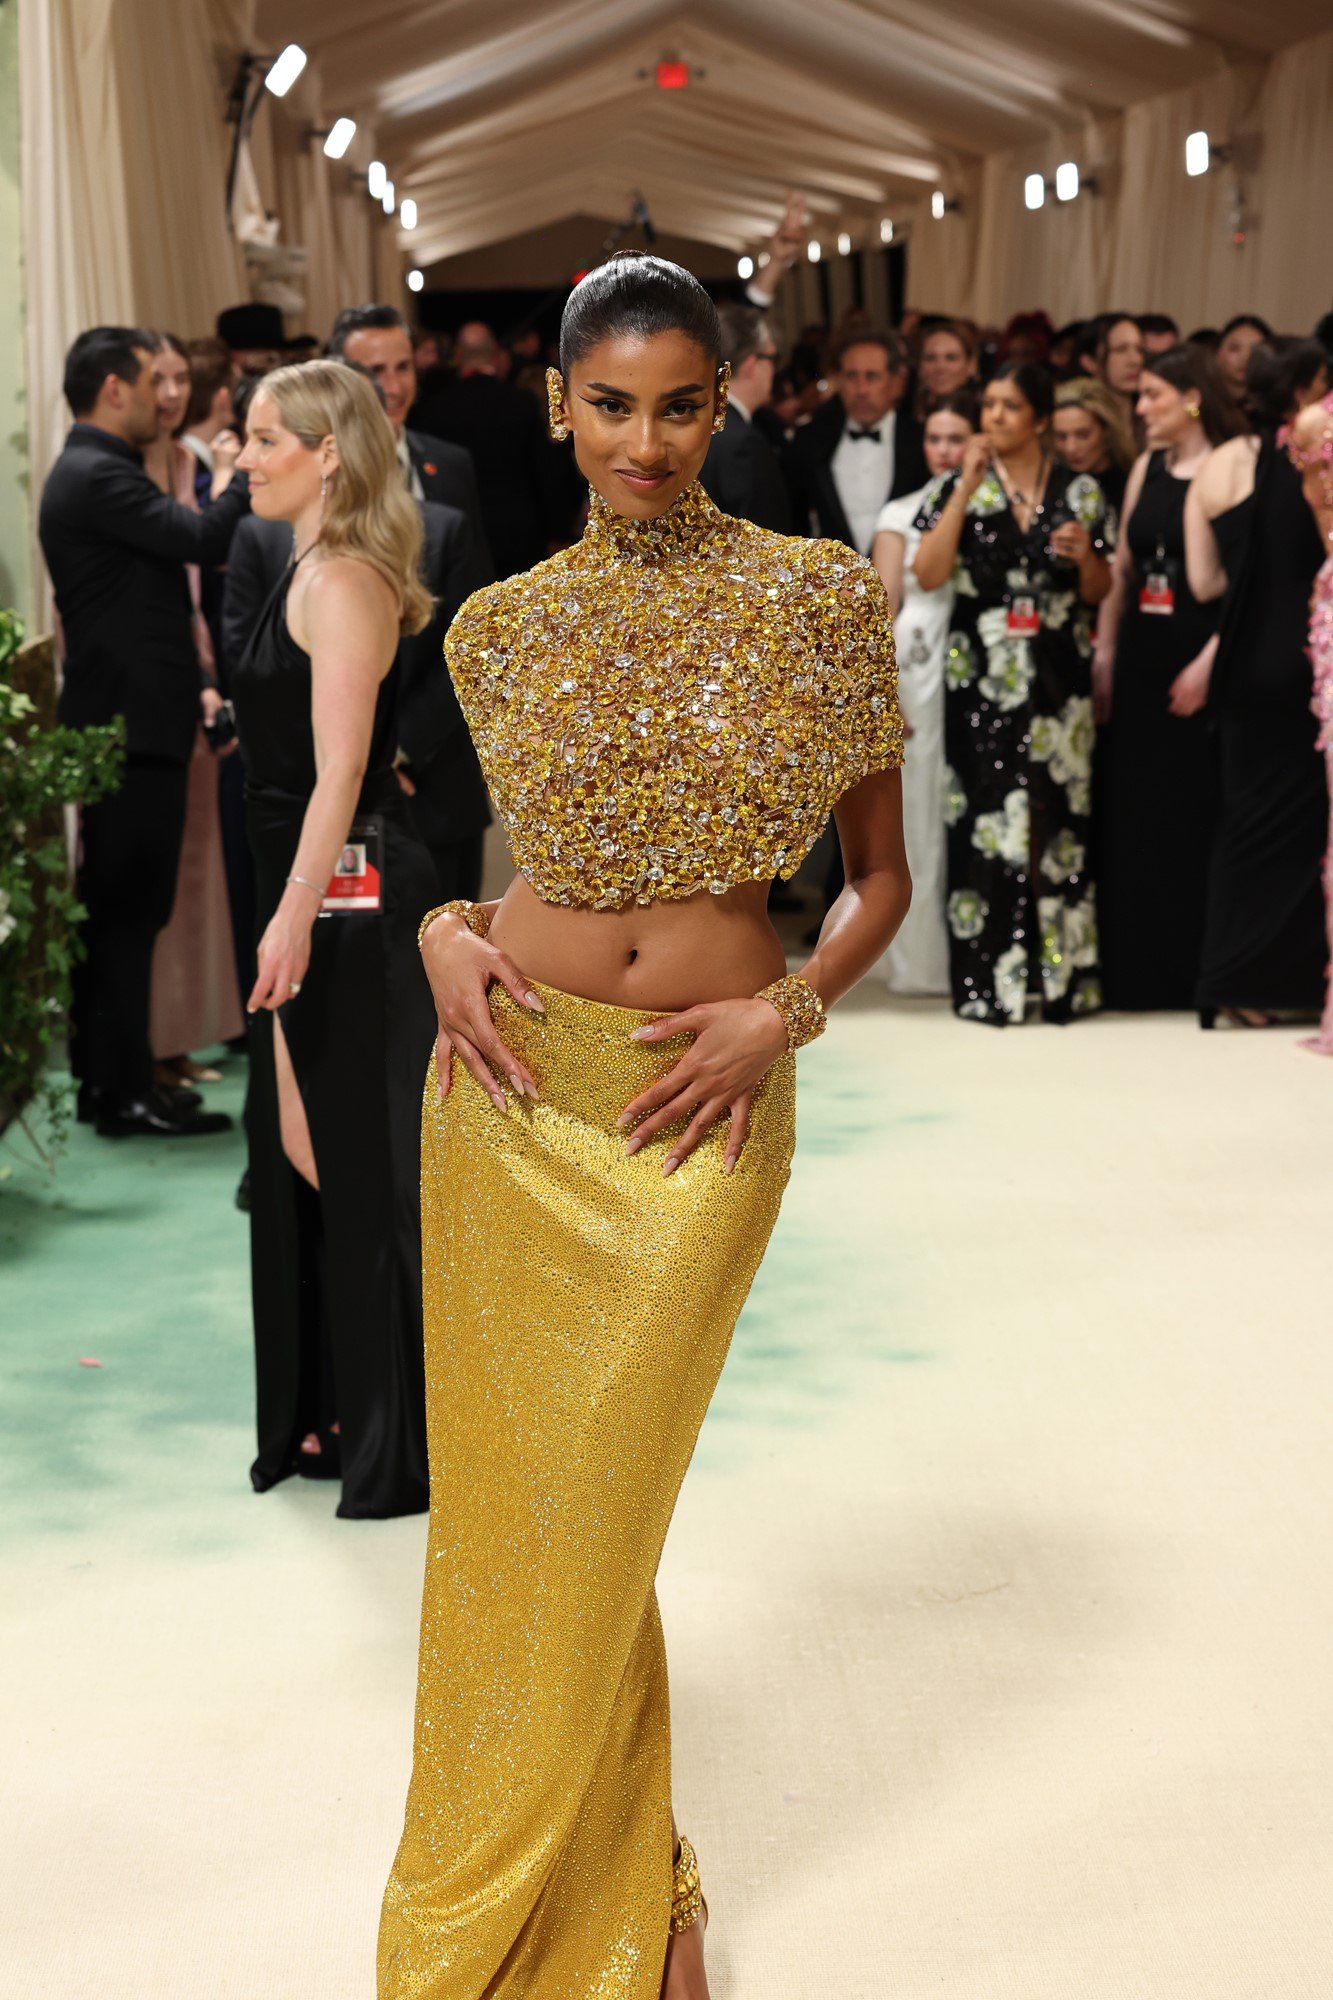 Imaan wears a gold bedazzled top and a low slung gold skirt.